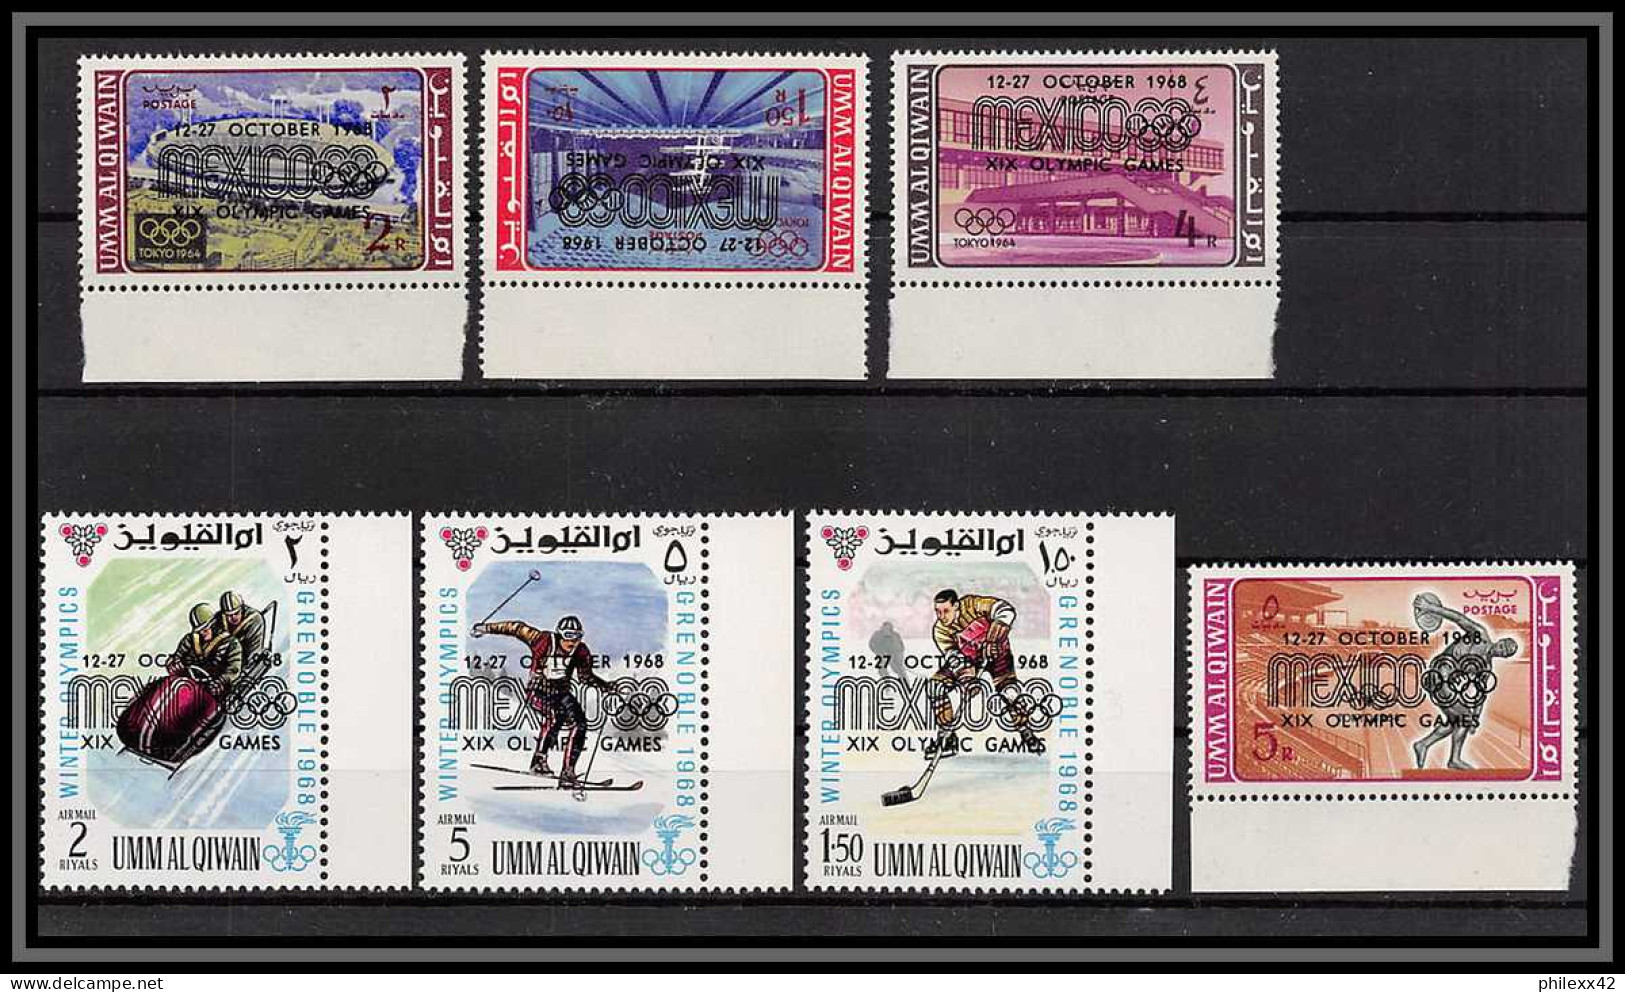 0221/ Umm Al Qiwain N°254/260 Tokyo 64 Overprint Surchargé MEXICO 68 Jeux Olympiques Olympic Games** Mnh - Sommer 1964: Tokio